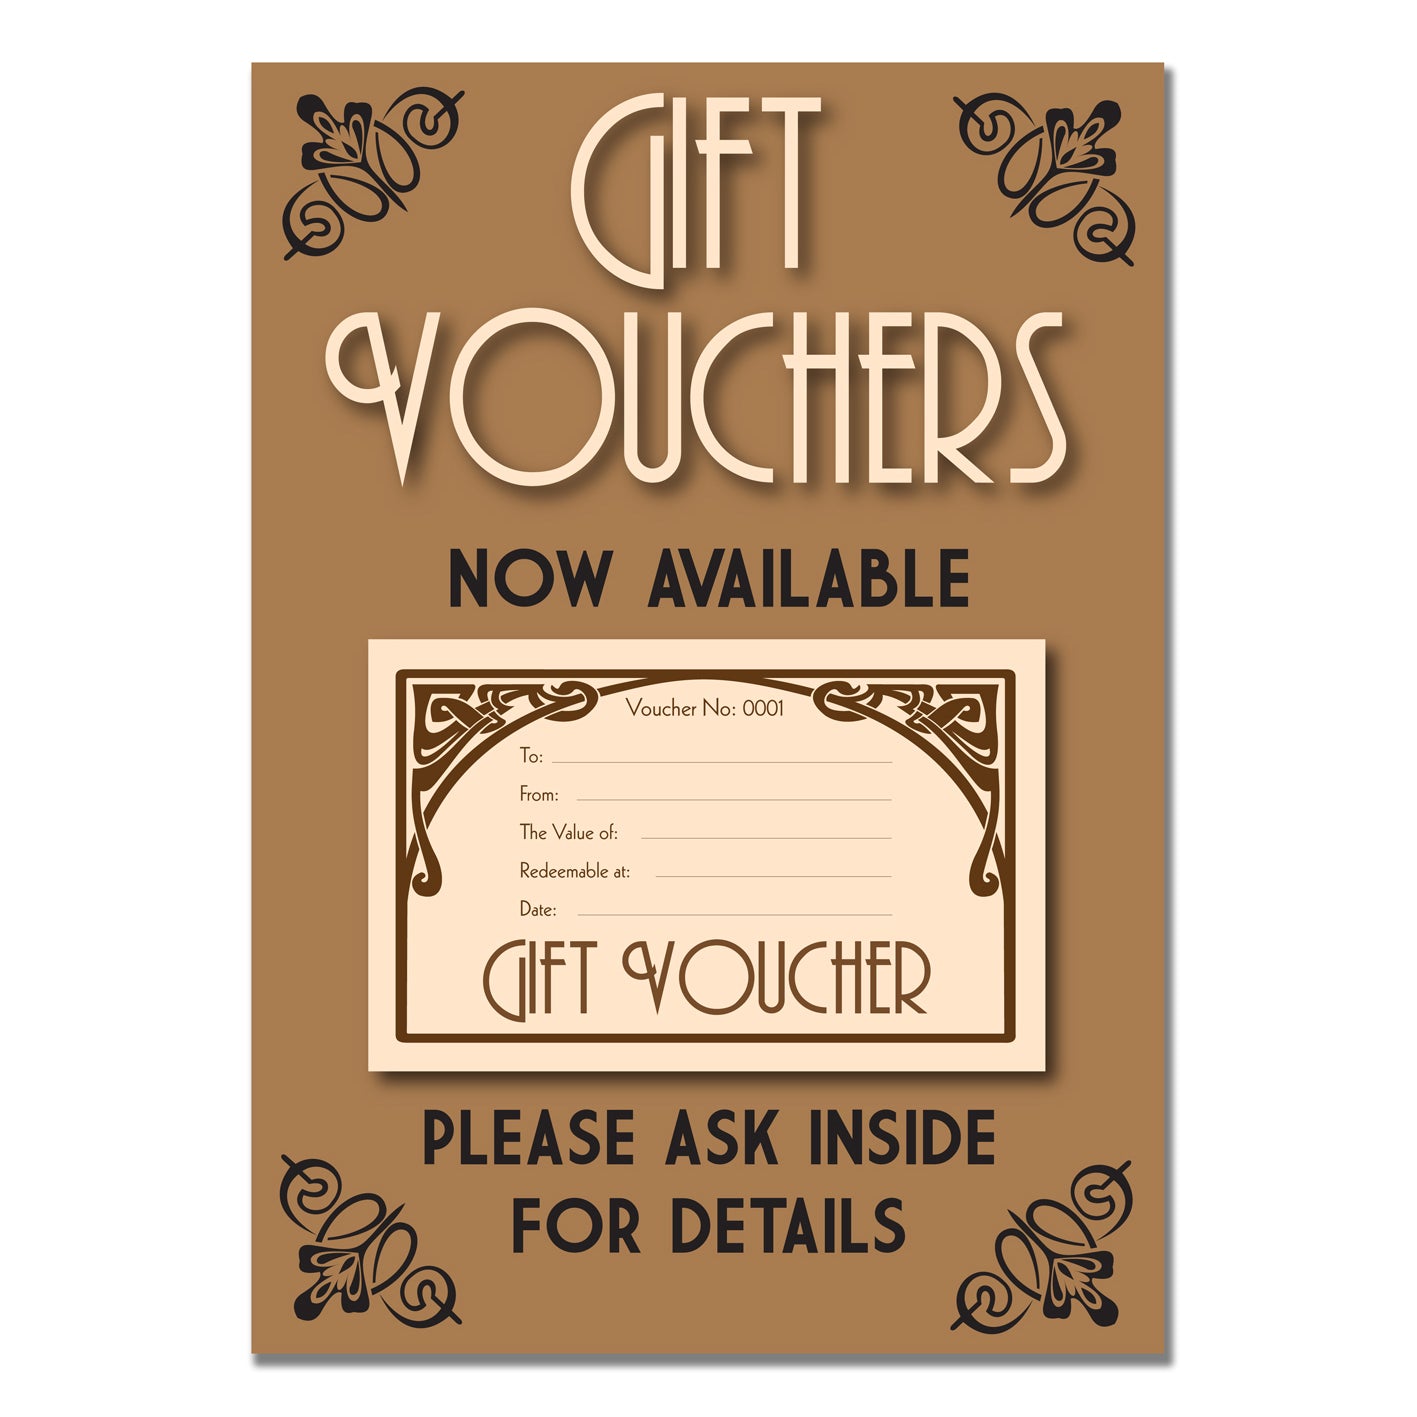 Art Deco Gift Voucher Book 99mm x 210mm with FREE A4 POSTER